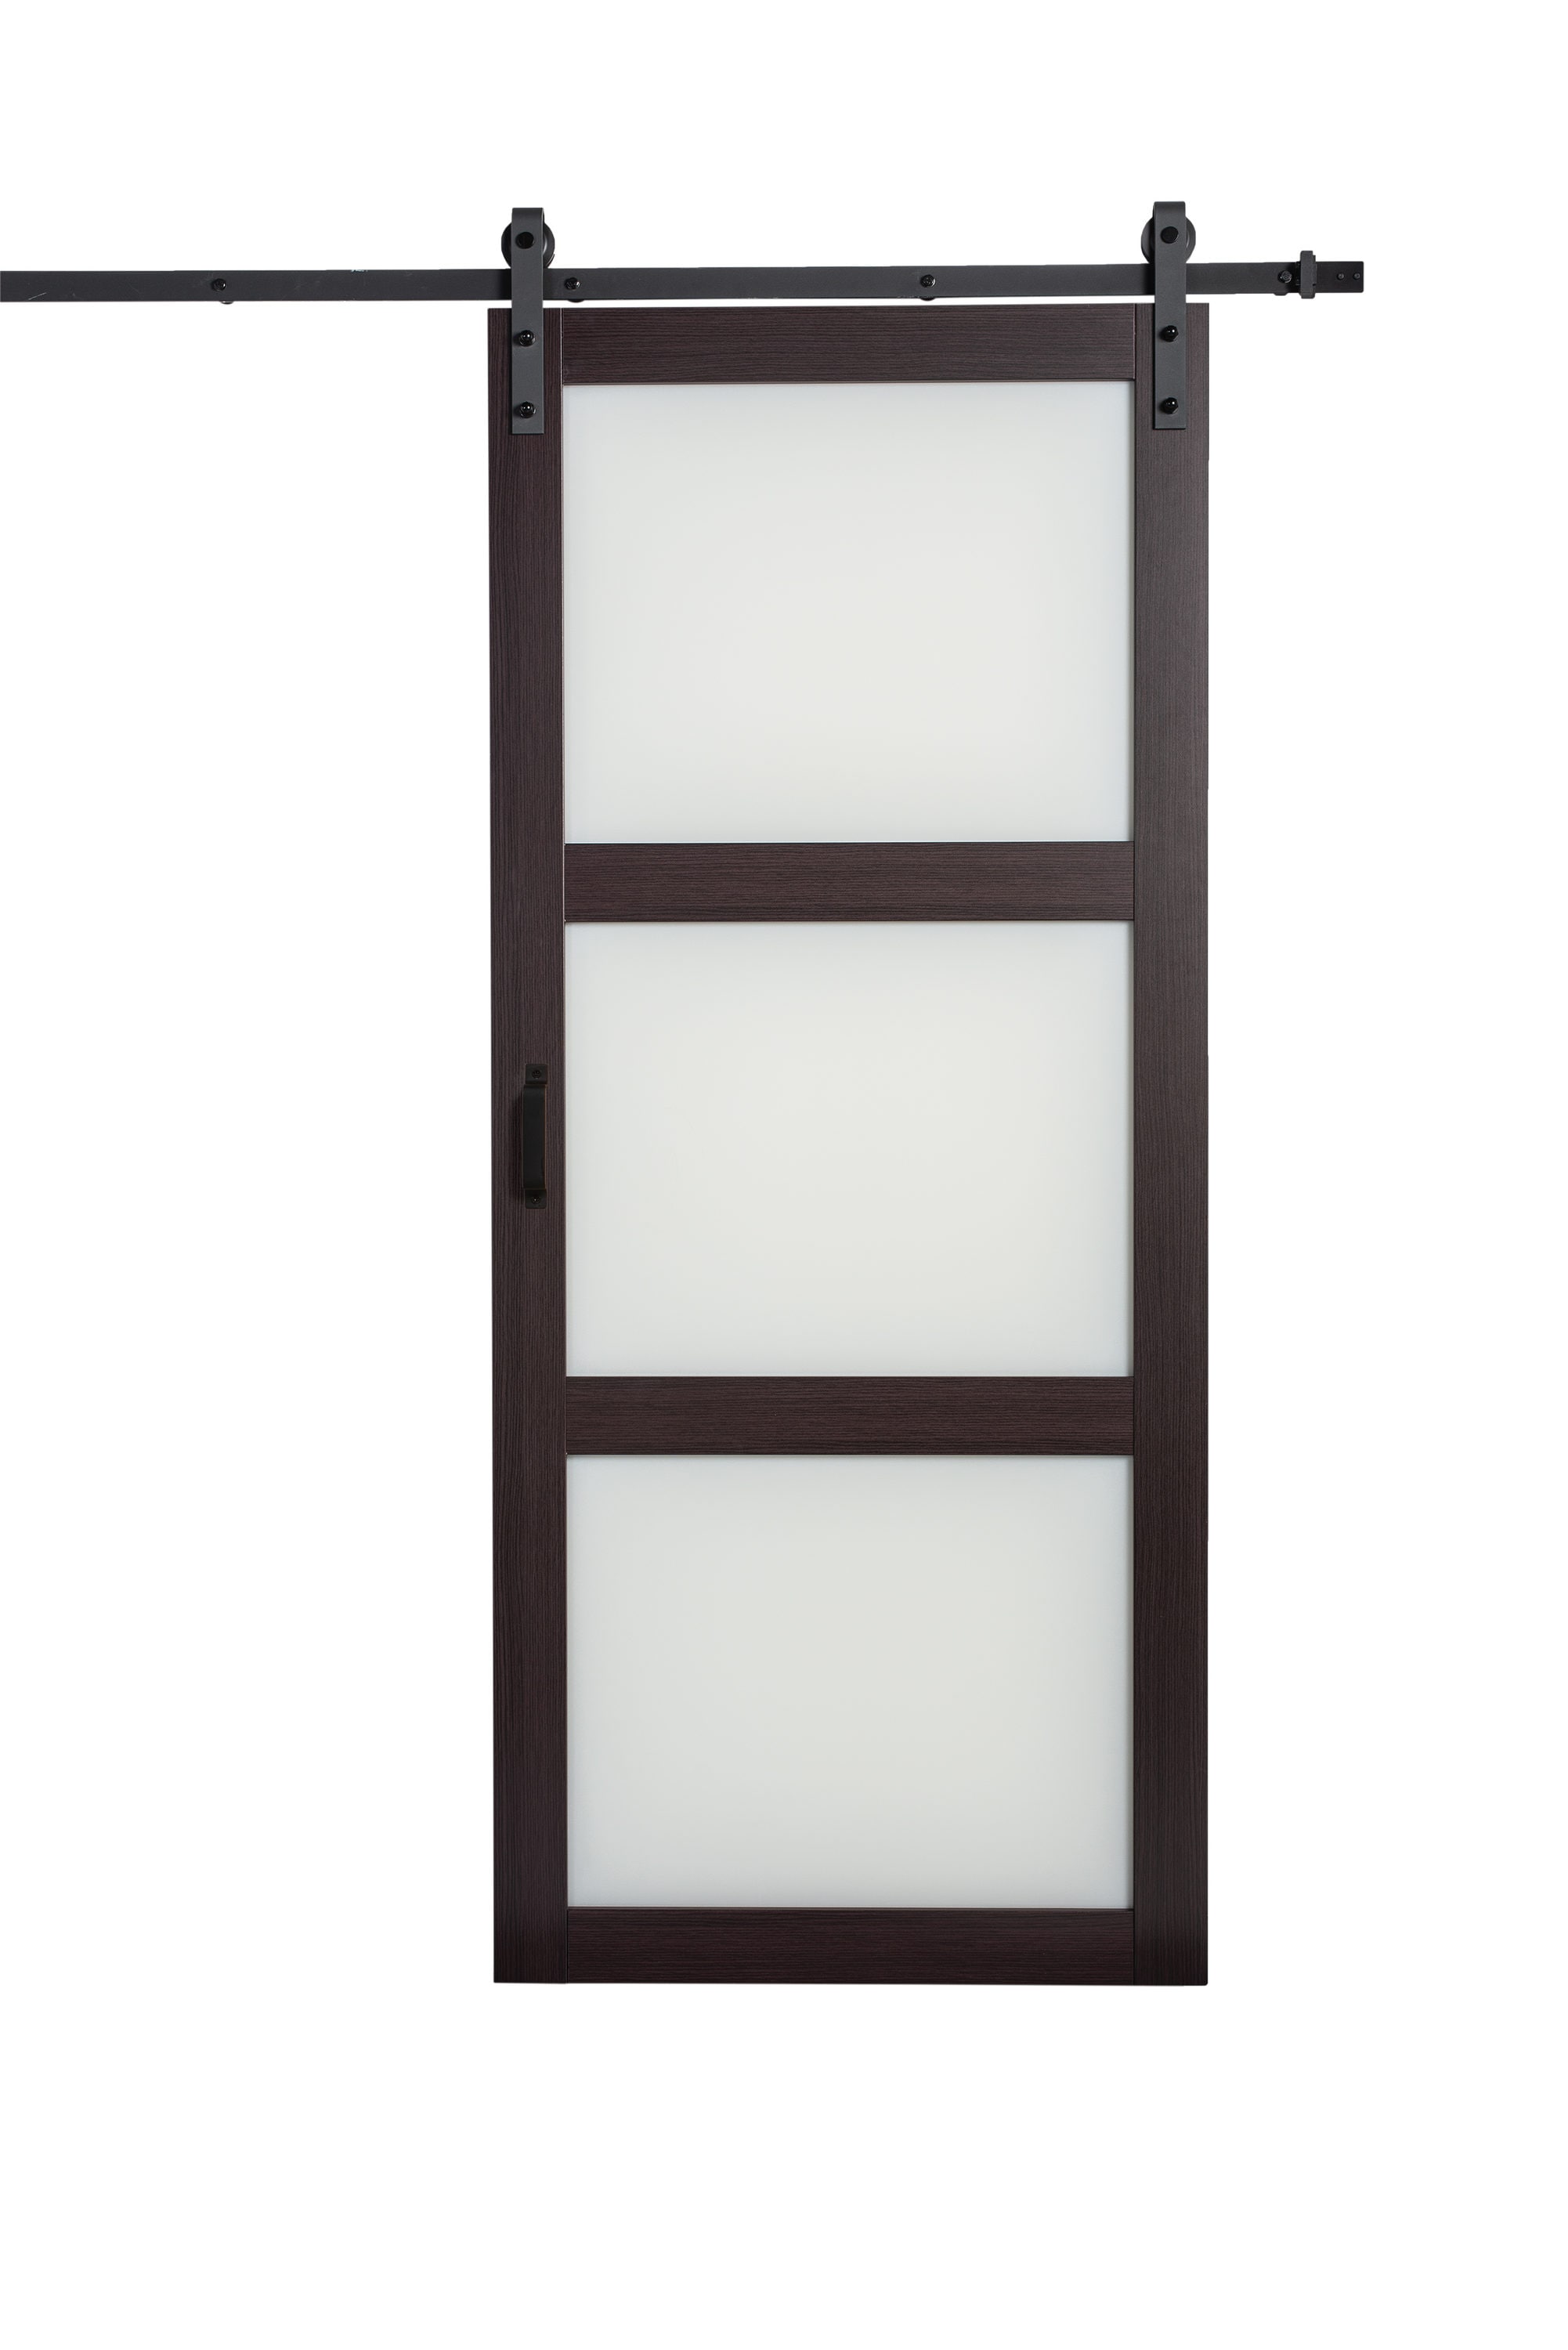 RELIABILT 36-in x 84-in Espresso Frosted Glass Mdf Single Barn Door ( Hardware Included) in the Barn Doors department at